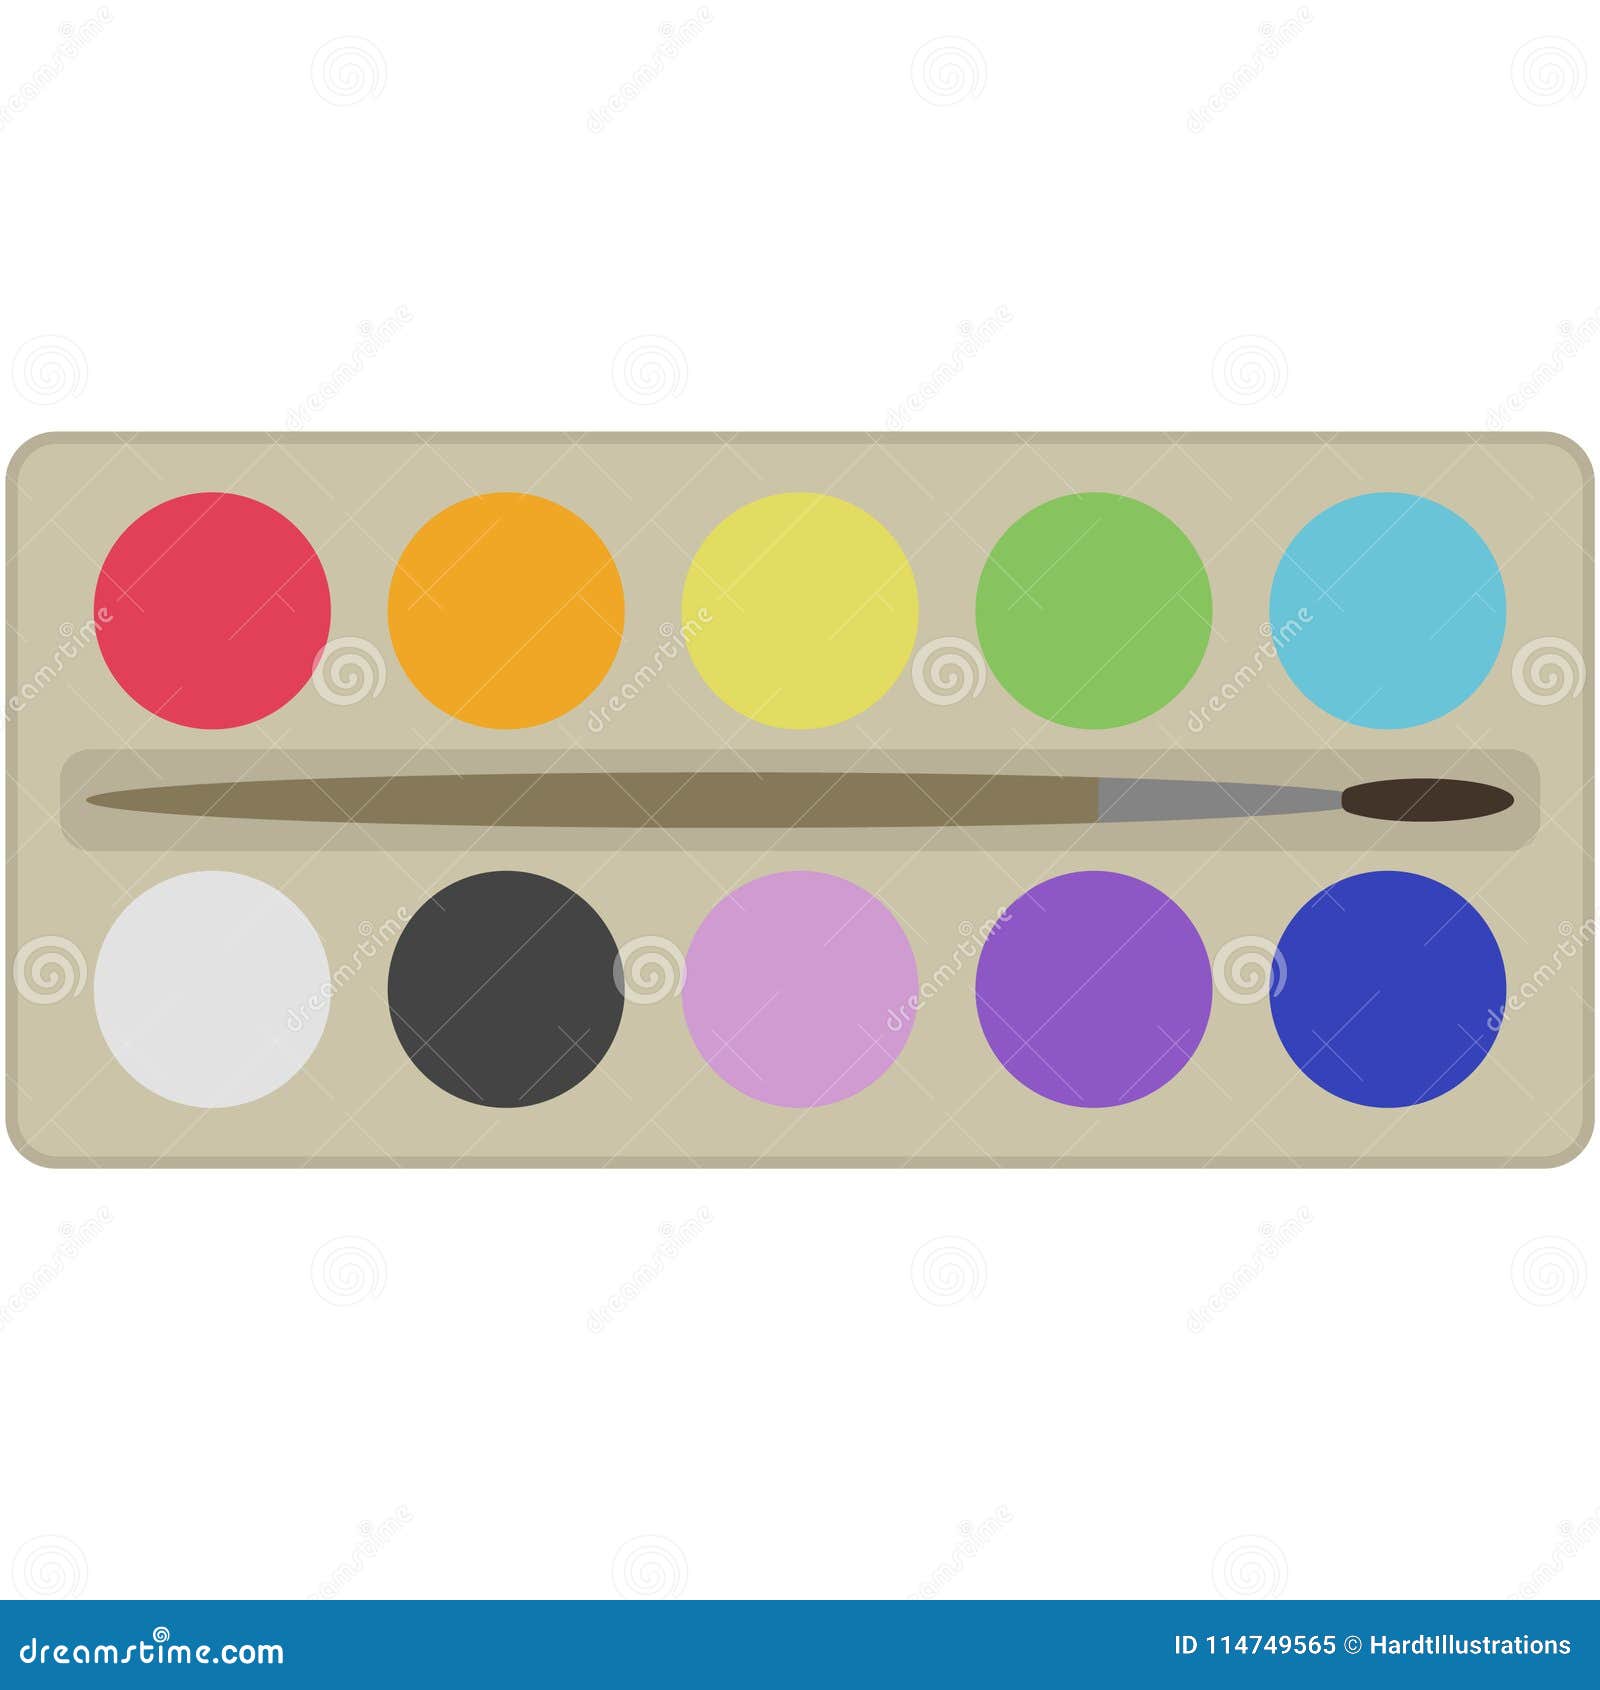 https://thumbs.dreamstime.com/z/watercolor-paint-set-brush-illustration-set-watercolor-paints-small-brush-isolated-white-background-114749565.jpg